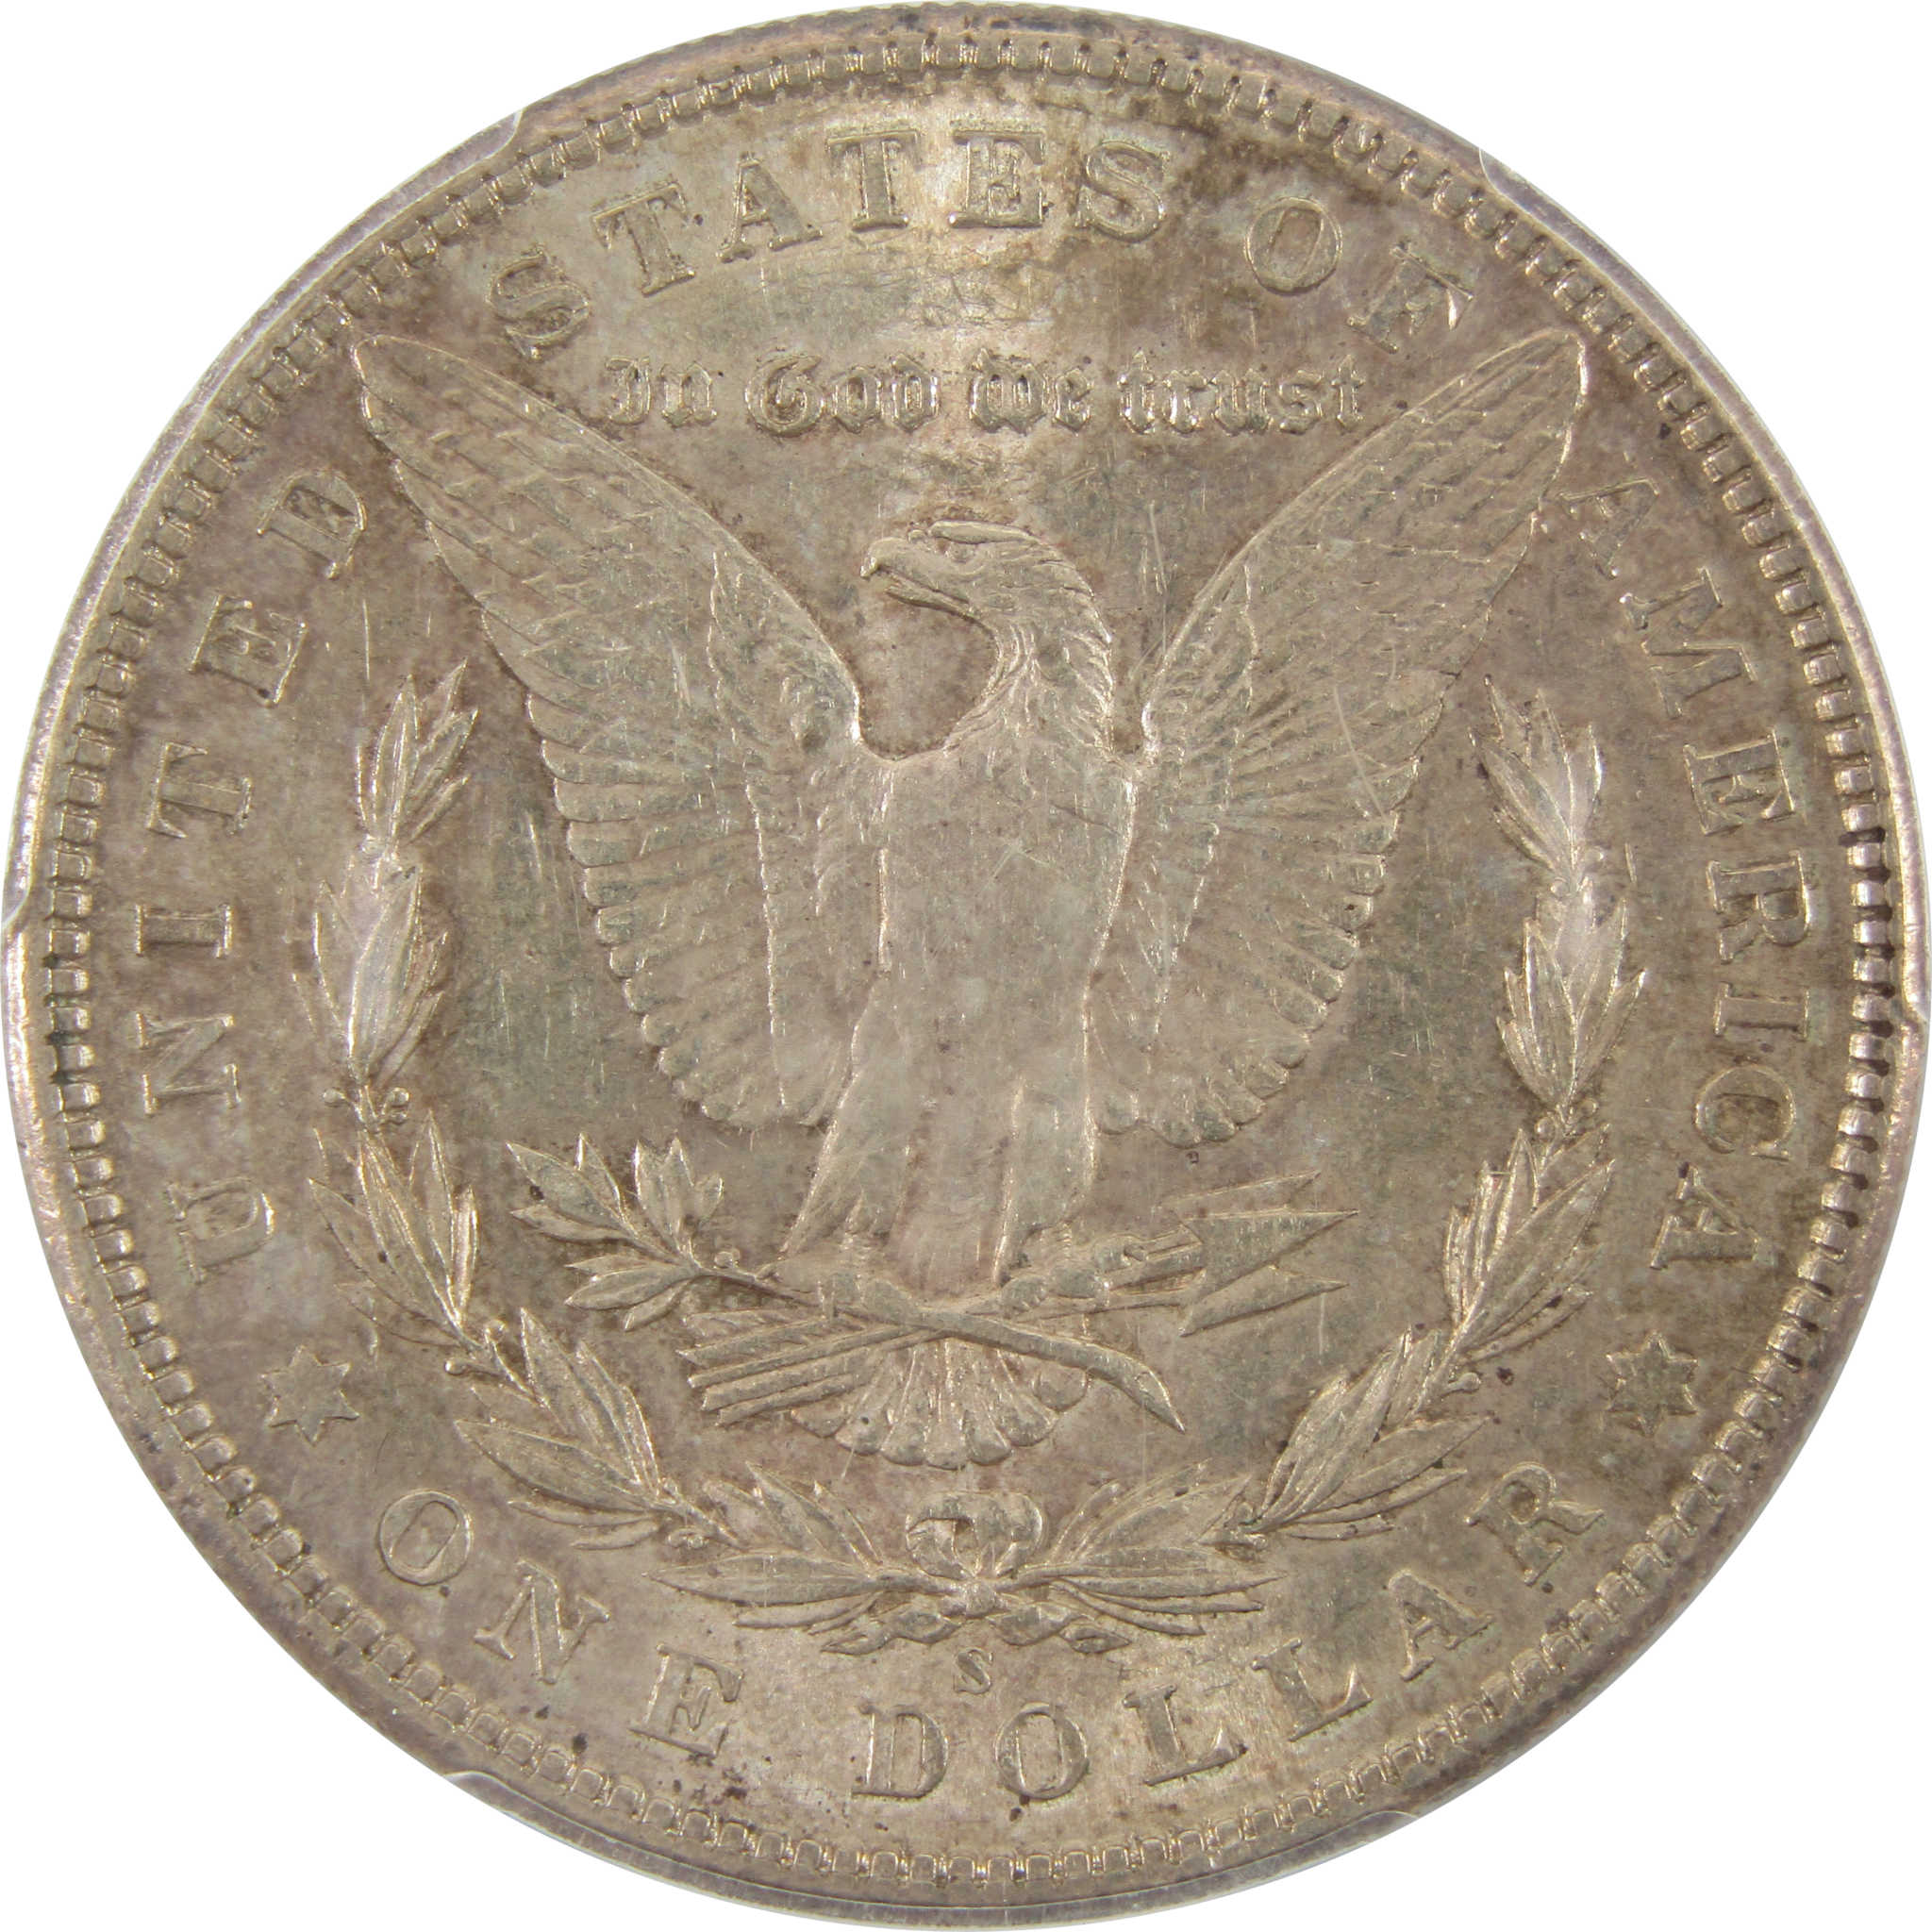 1904 S Morgan Dollar MS 62 PCGS 90% Silver $1 Uncirculated SKU:CPC4004 - Morgan coin - Morgan silver dollar - Morgan silver dollar for sale - Profile Coins &amp; Collectibles